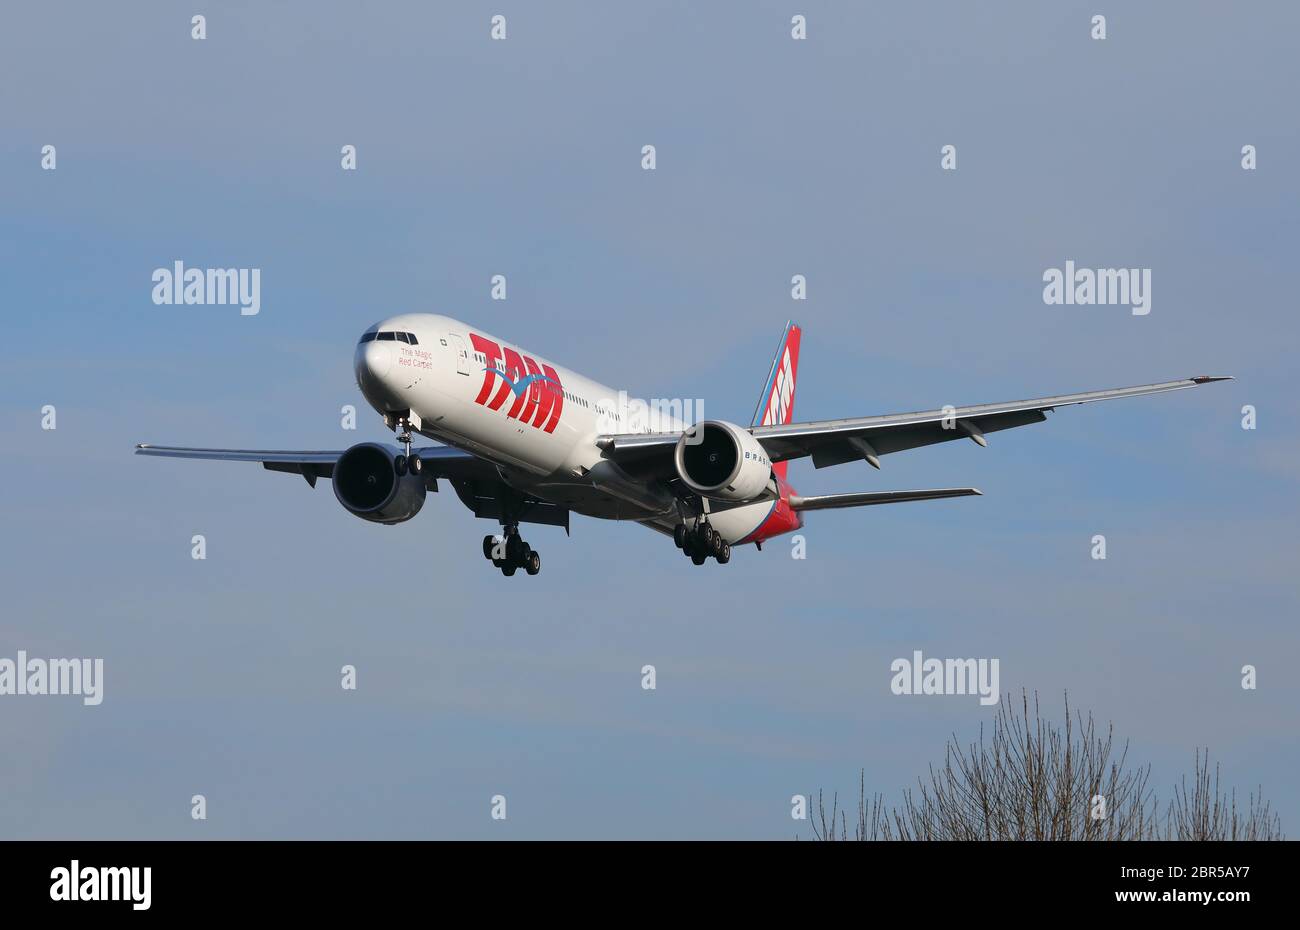 Boeing 777-300 airliner landing at Heathrow airport in the UK. Stock Photo